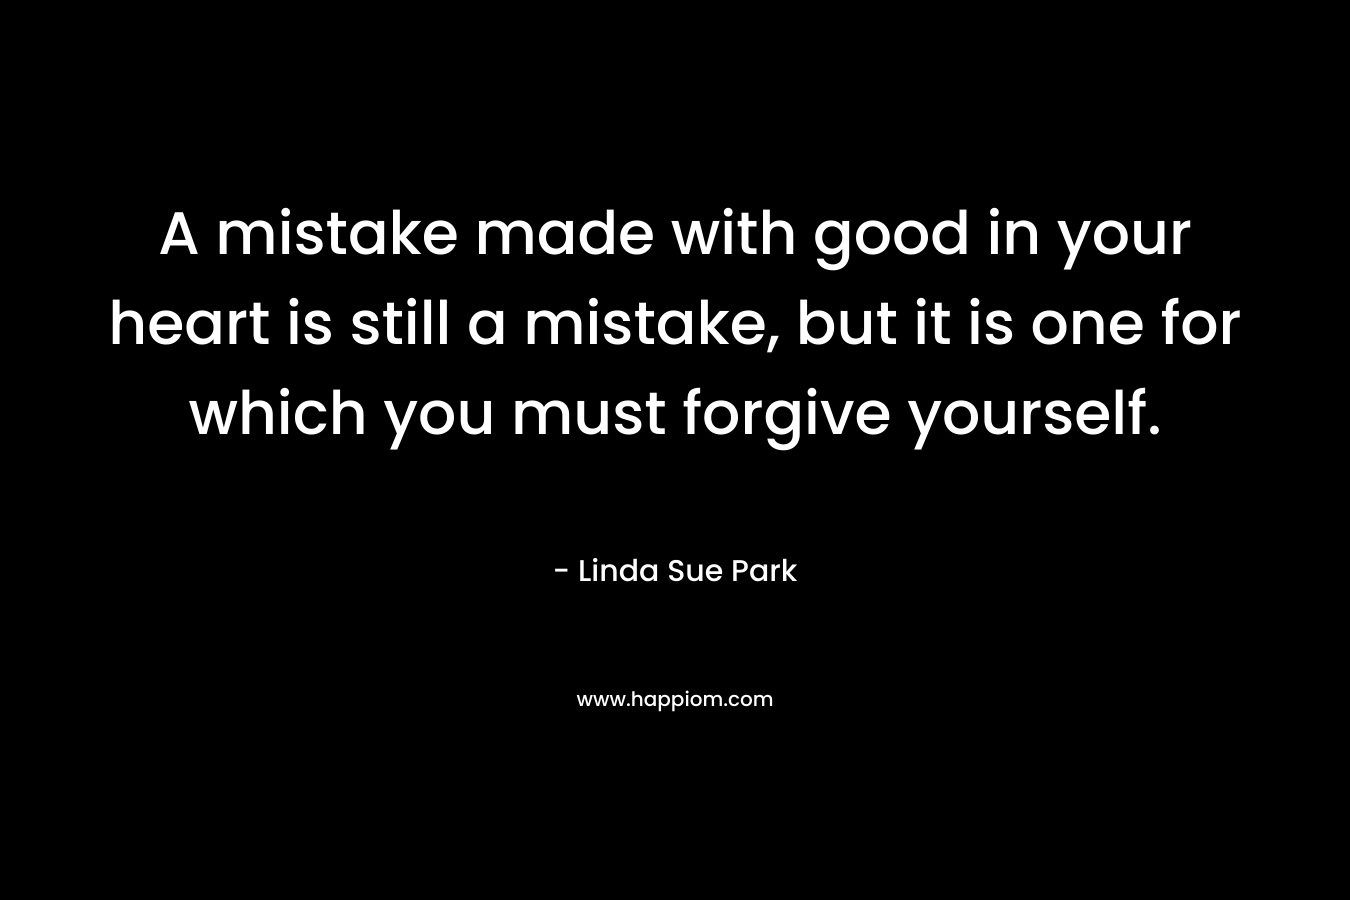 A mistake made with good in your heart is still a mistake, but it is one for which you must forgive yourself.